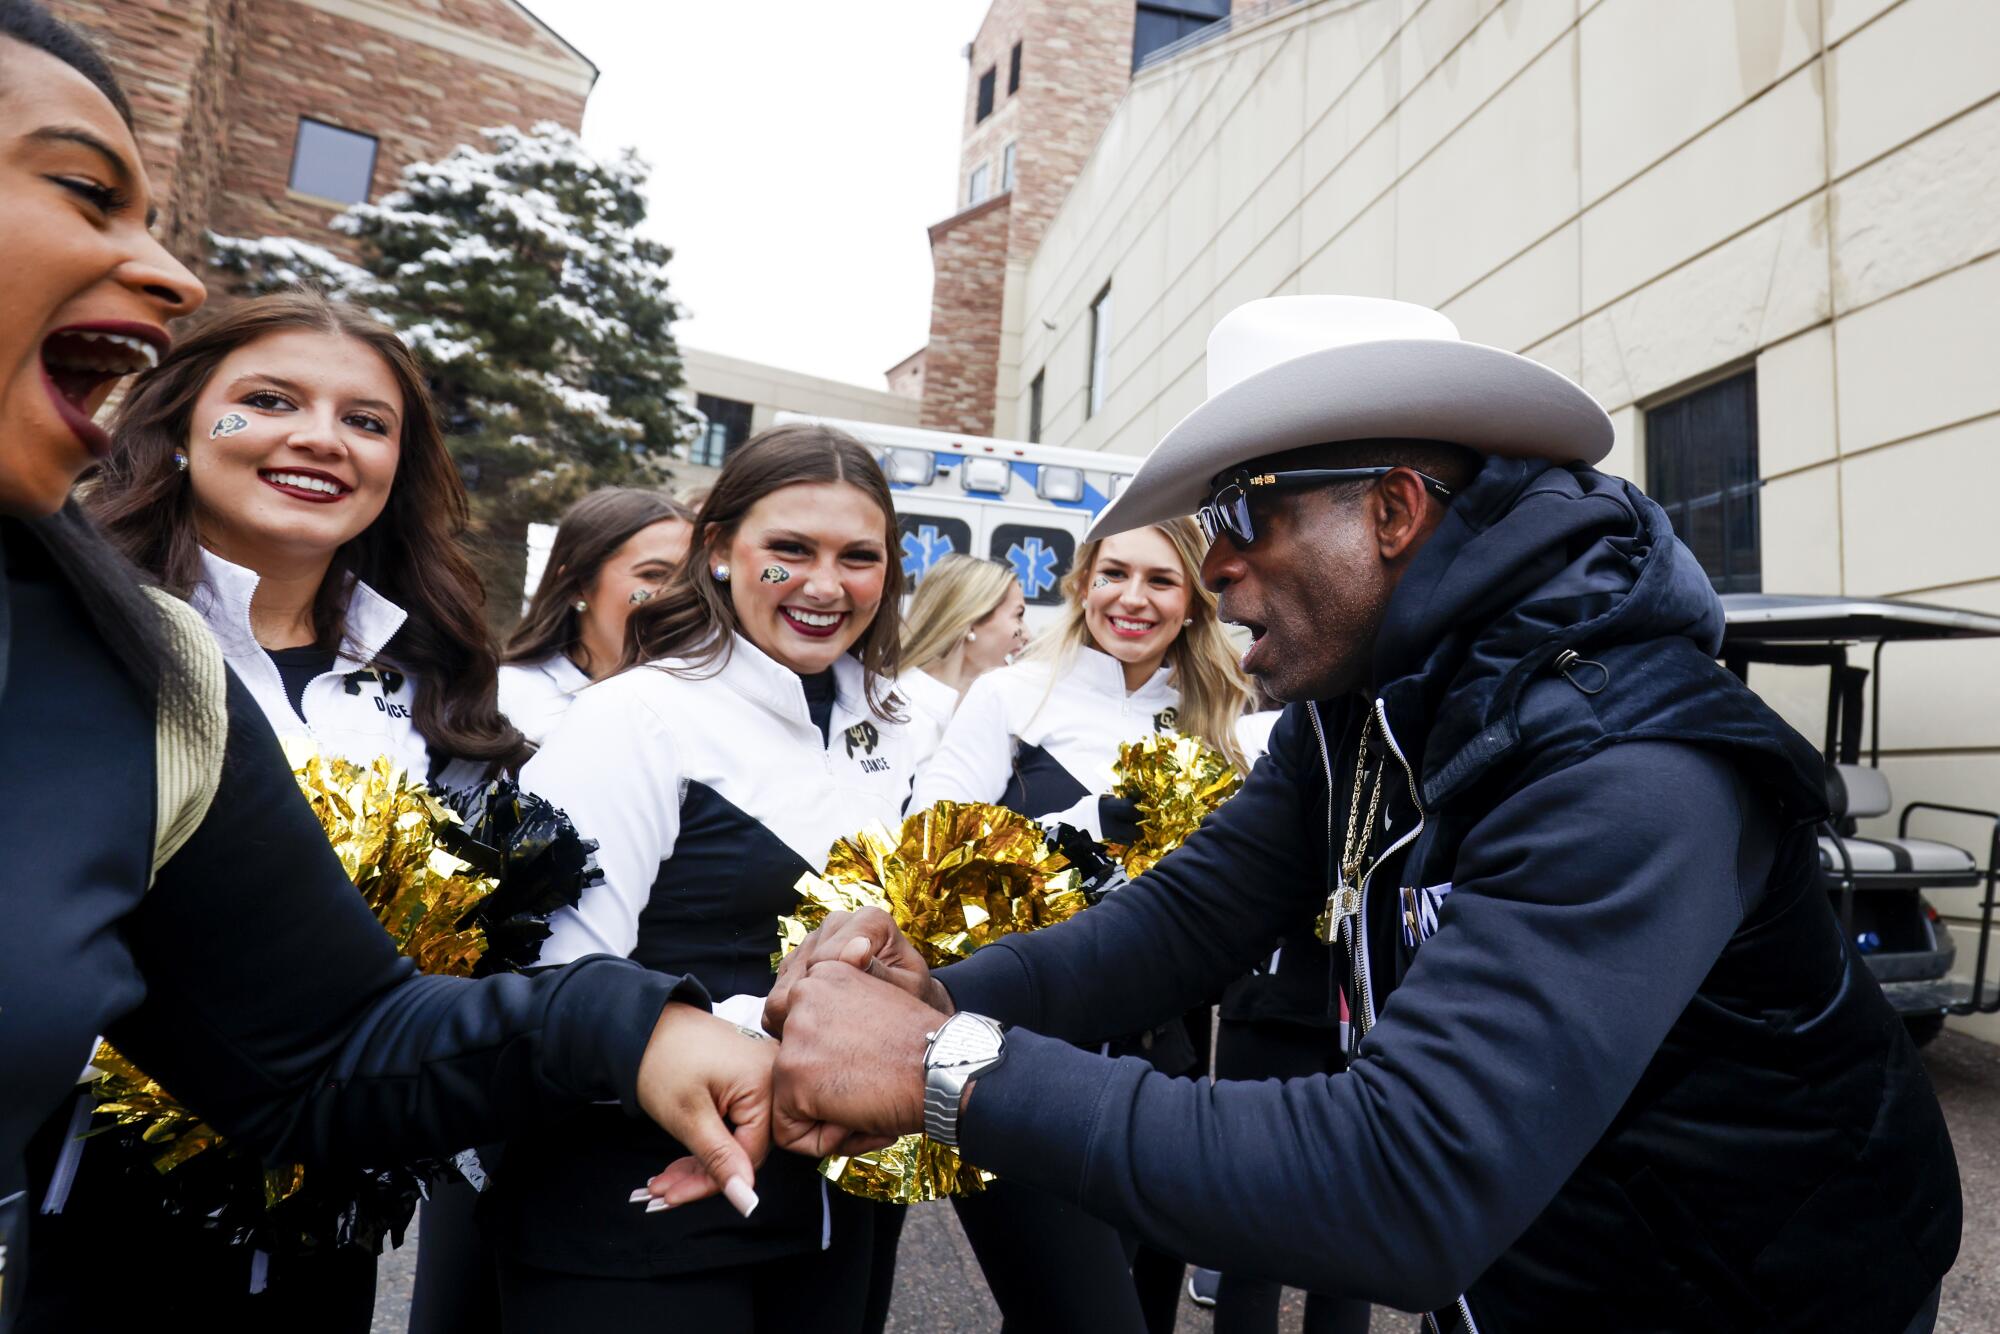 Colorado coach Deion Sanders gives fist bumps to cheerleaders before the Buffaloes' spring football game on April 22